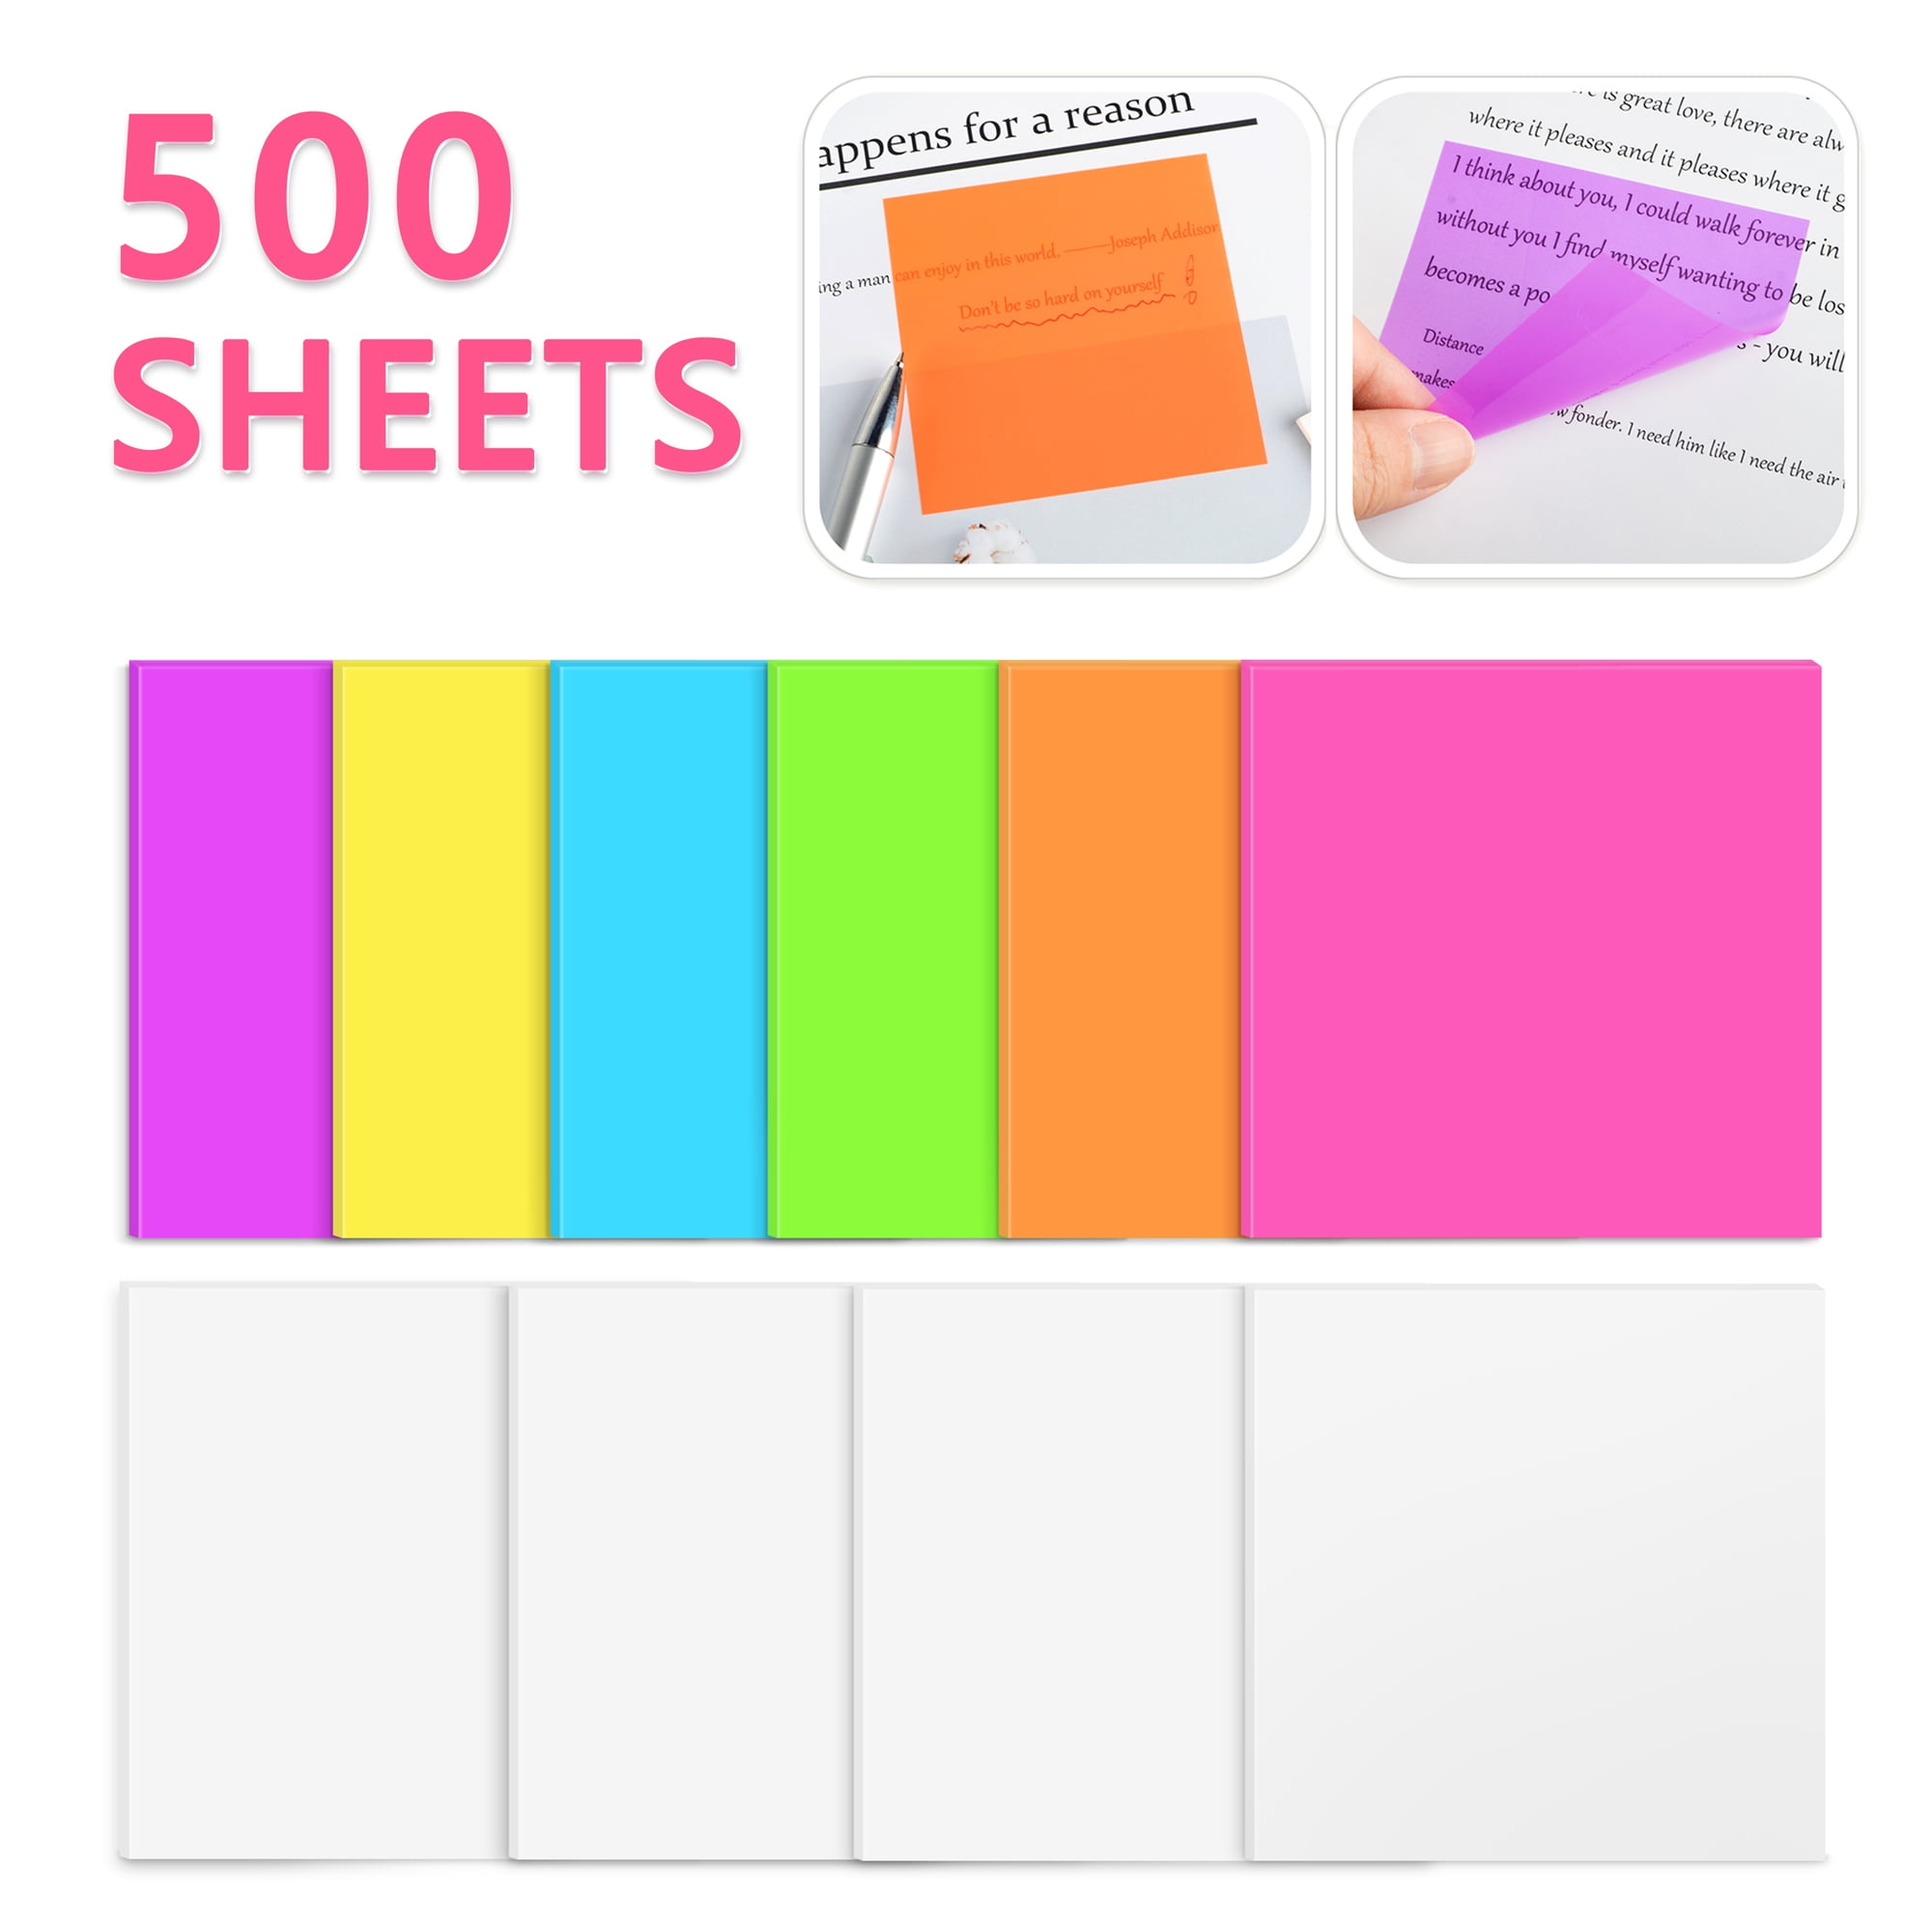 Transparent Sticky Tabs and Notes Set of 12 Pads, See Through Colored Memo  Note Pads Waterproof Self-Stick Pads for Office School Home Supplies (500  Sheets, Self-Adhesive) 